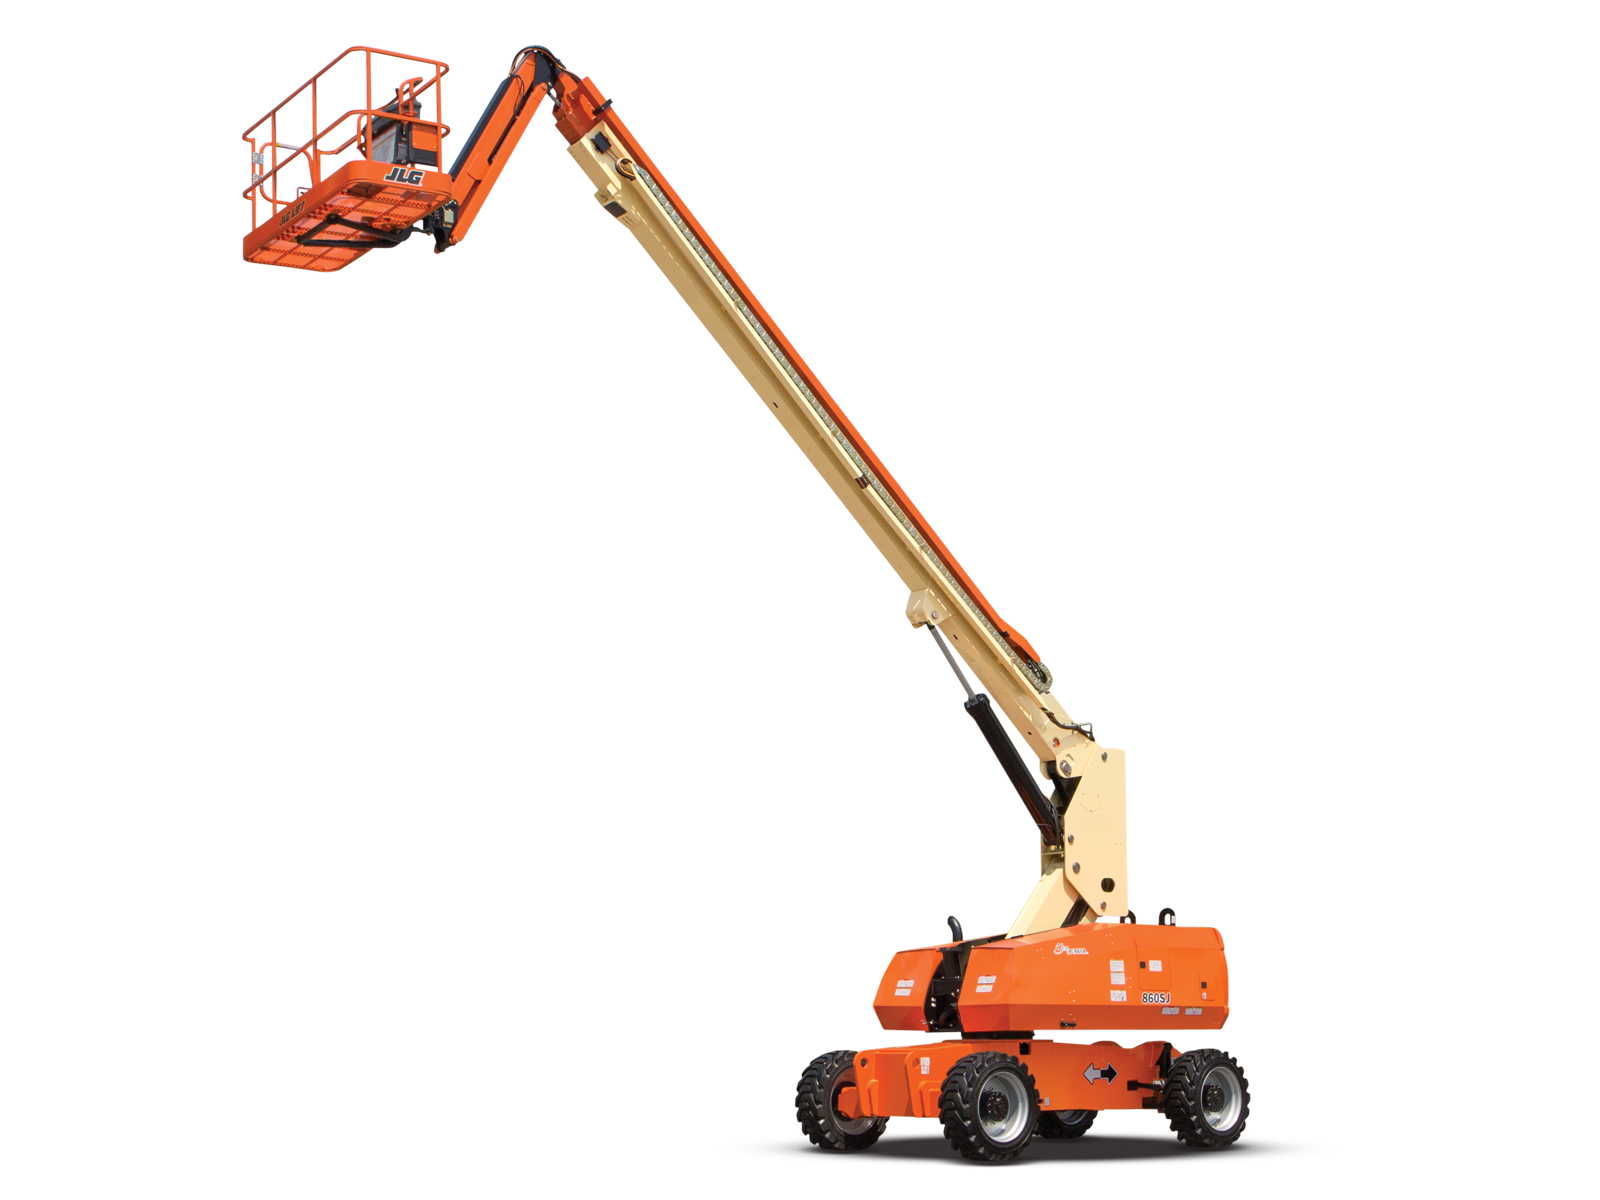 used 86 foot straight boom lift for sale